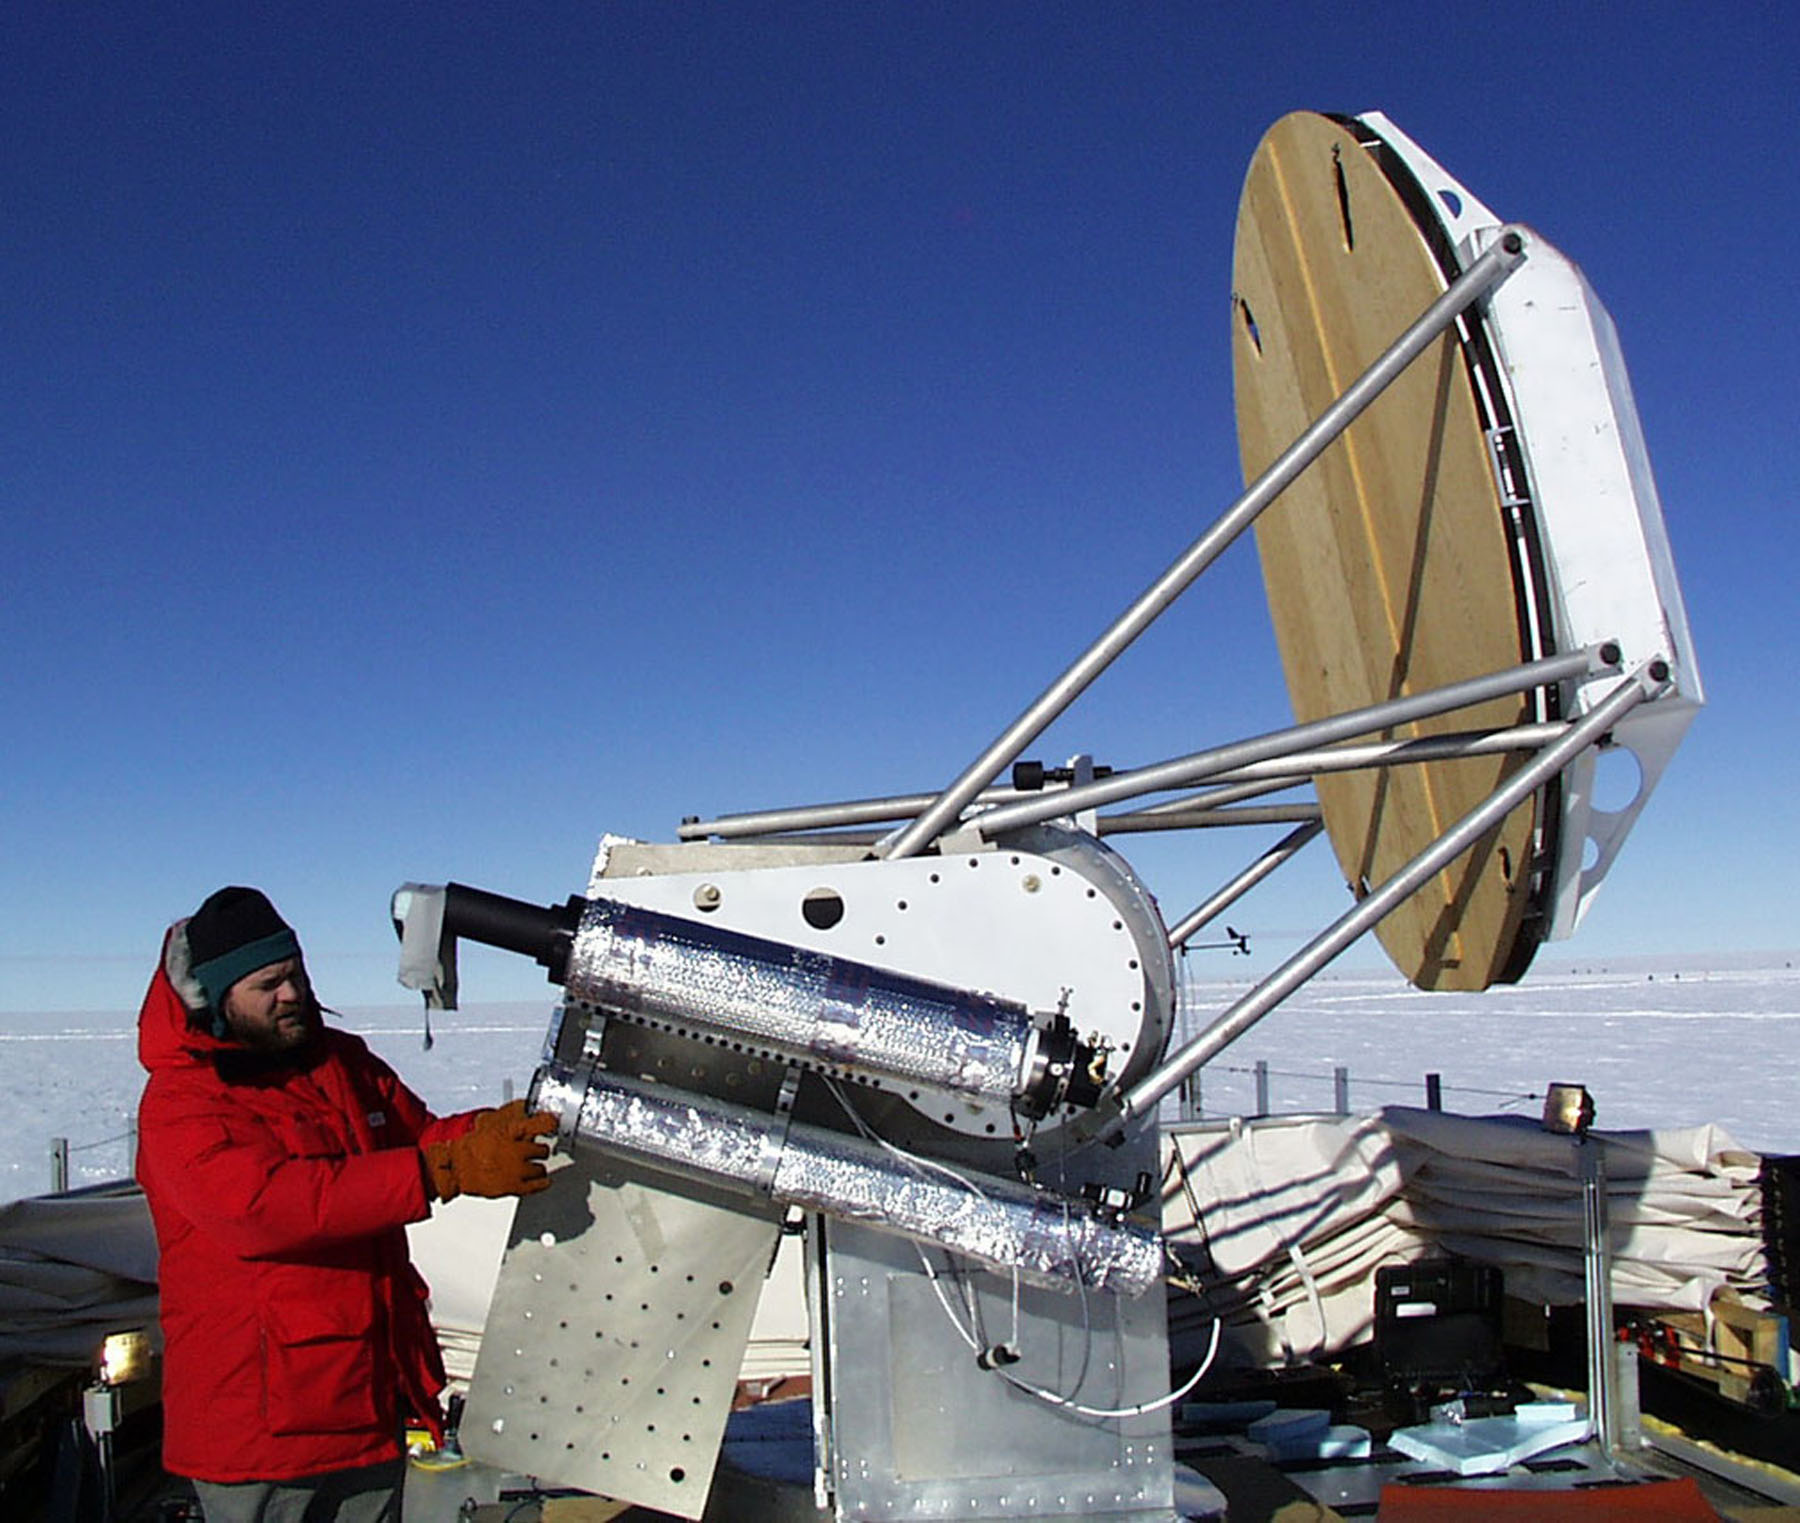 A man in a red parka works with a satellite receiver.